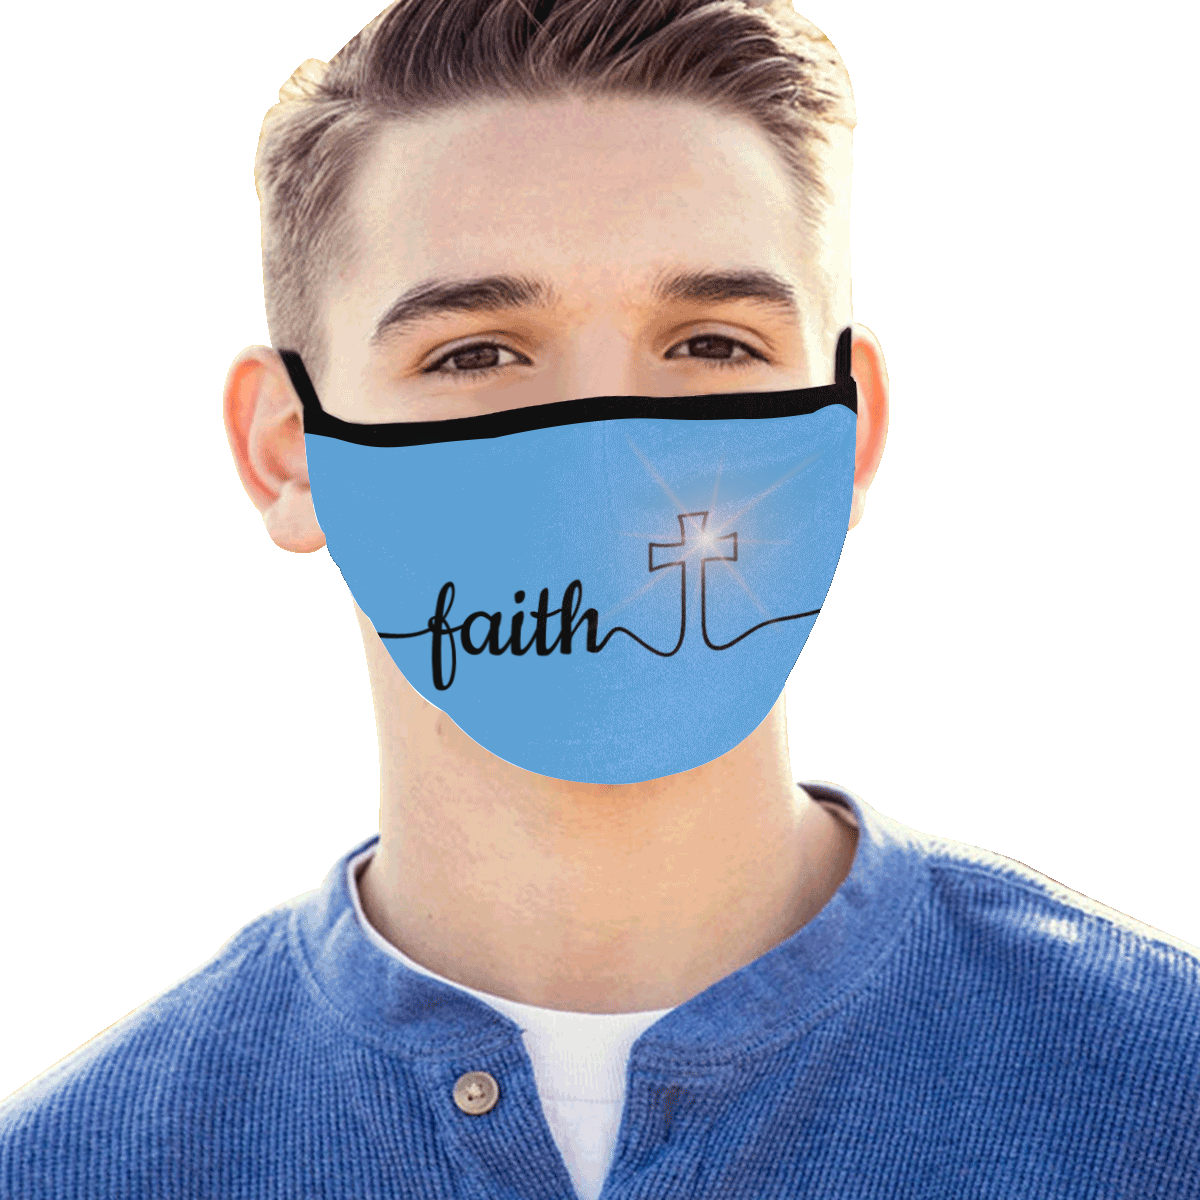 Fairlings Delight's The Word Collection- Faith 53086a4 Mouth Mask